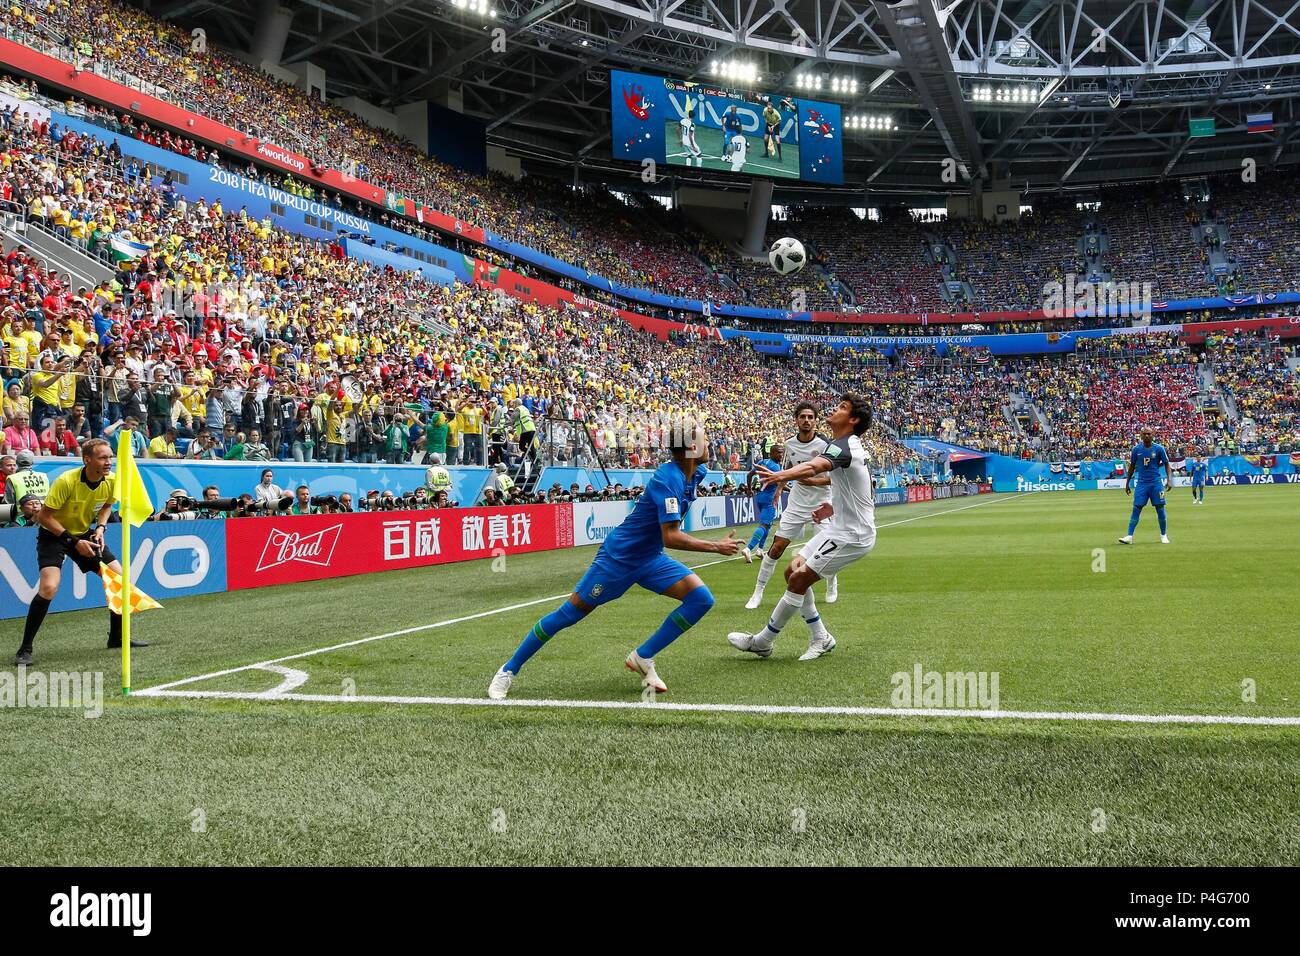 St Petersburg, Russia. 22nd June, 2018. Neymar of Brazil flicks the ball over Yeltsin Tejeda of Costa Rica during the 2018 FIFA World Cup Group E match between Brazil and Costa Rica at Saint Petersburg Stadium on June 22nd 2018 in Saint Petersburg, Russia. (Photo by Daniel Chesterton/phcimages.com) Credit: PHC Images/Alamy Live News Stock Photo